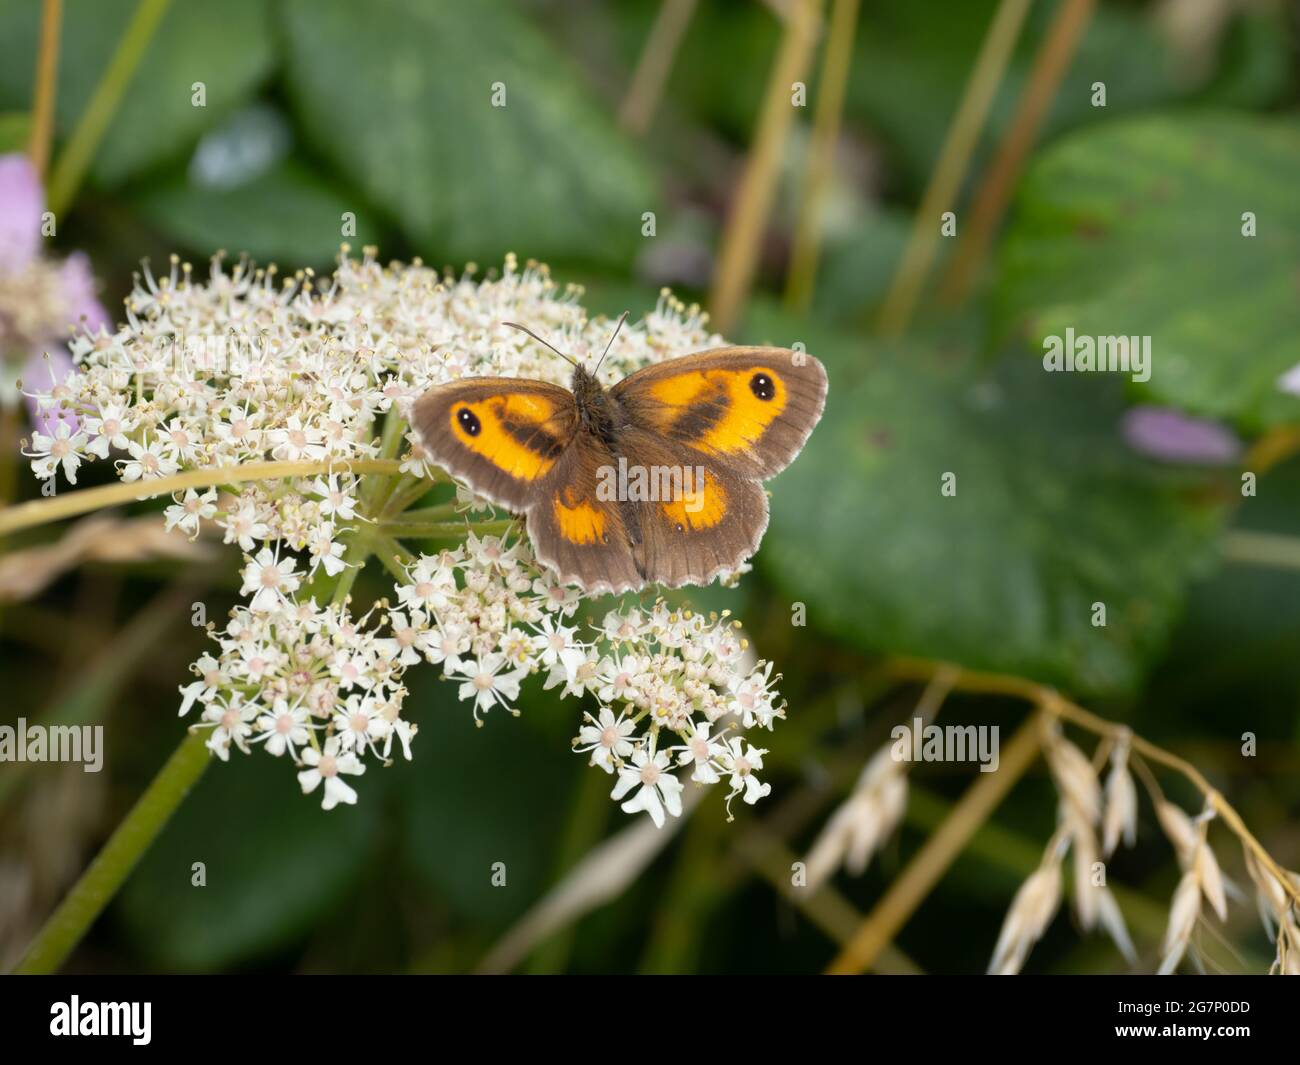 A male Gatekeeper Butterfly also known as the Hedge Brown (Pyronia tithonus), feeding on white flowers. Stock Photo